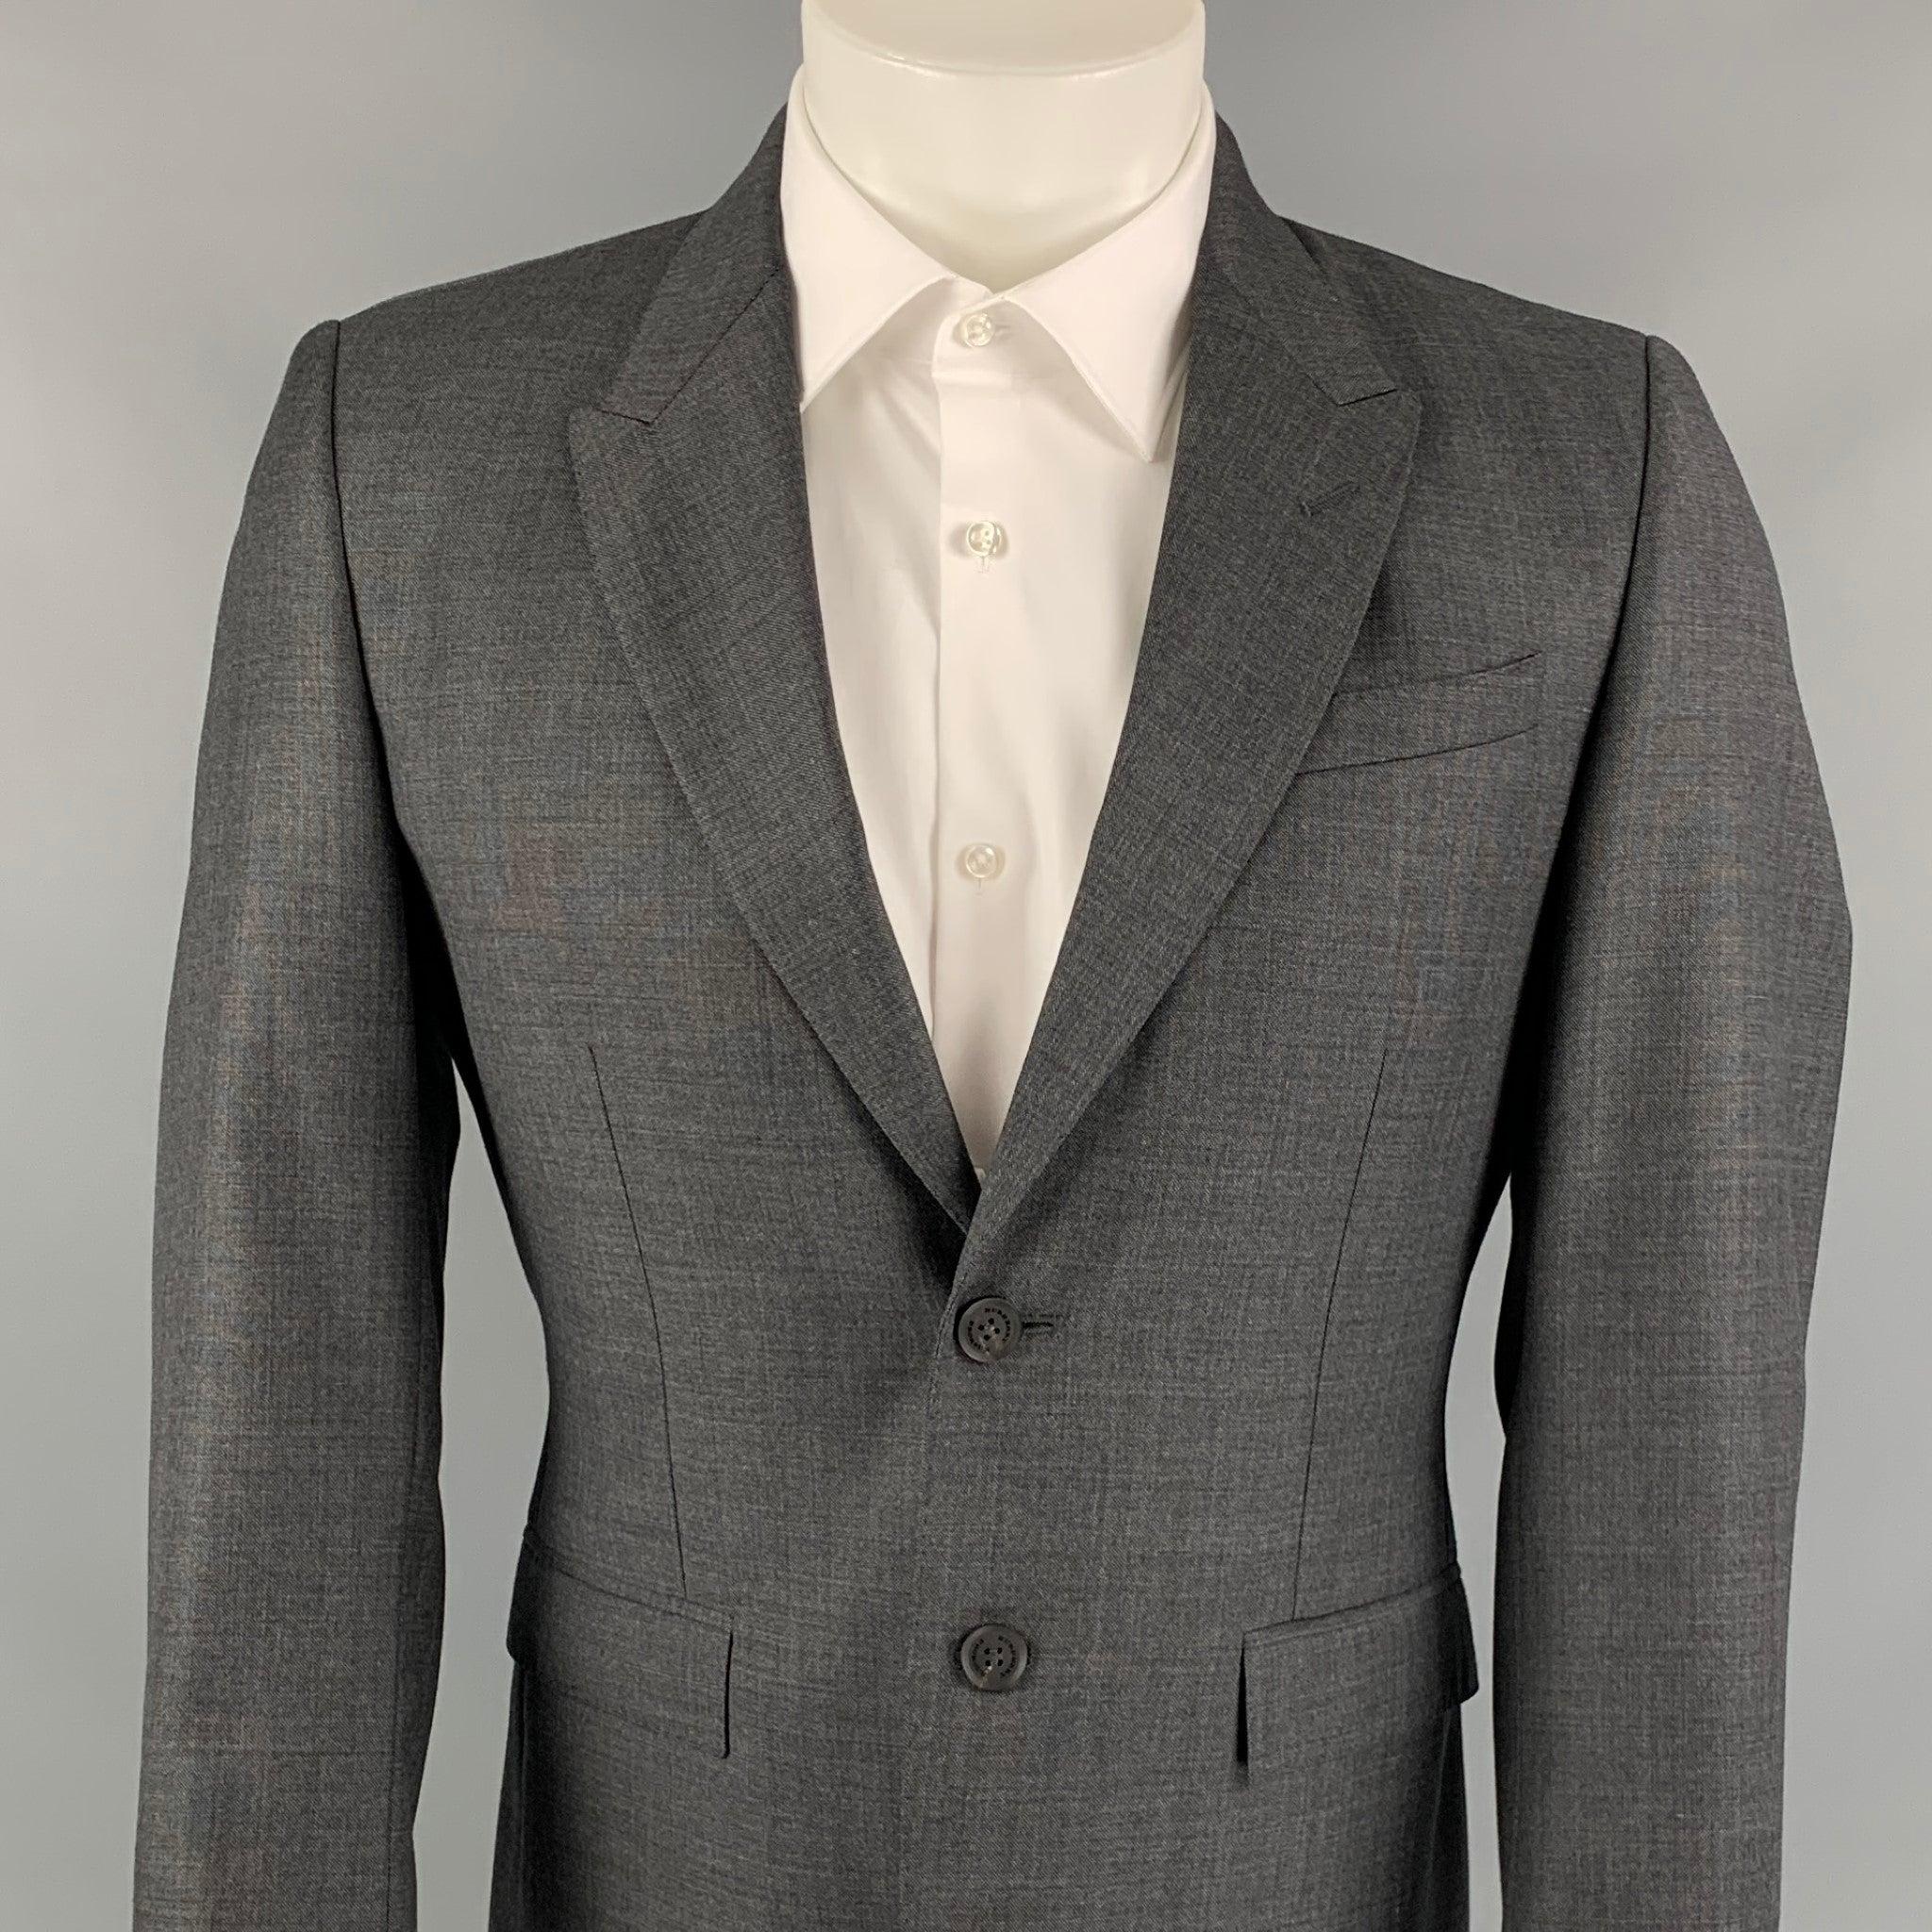 BURBERRY PRORSUM sport coat comes in a slate grey with a full monogram print featuring a slim fit, peak lapel, flap pockets, double back vent, and a two button closure. Made in Italy.
Excellent
Pre-Owned Condition.  

Marked:   Exclusive for Ryan